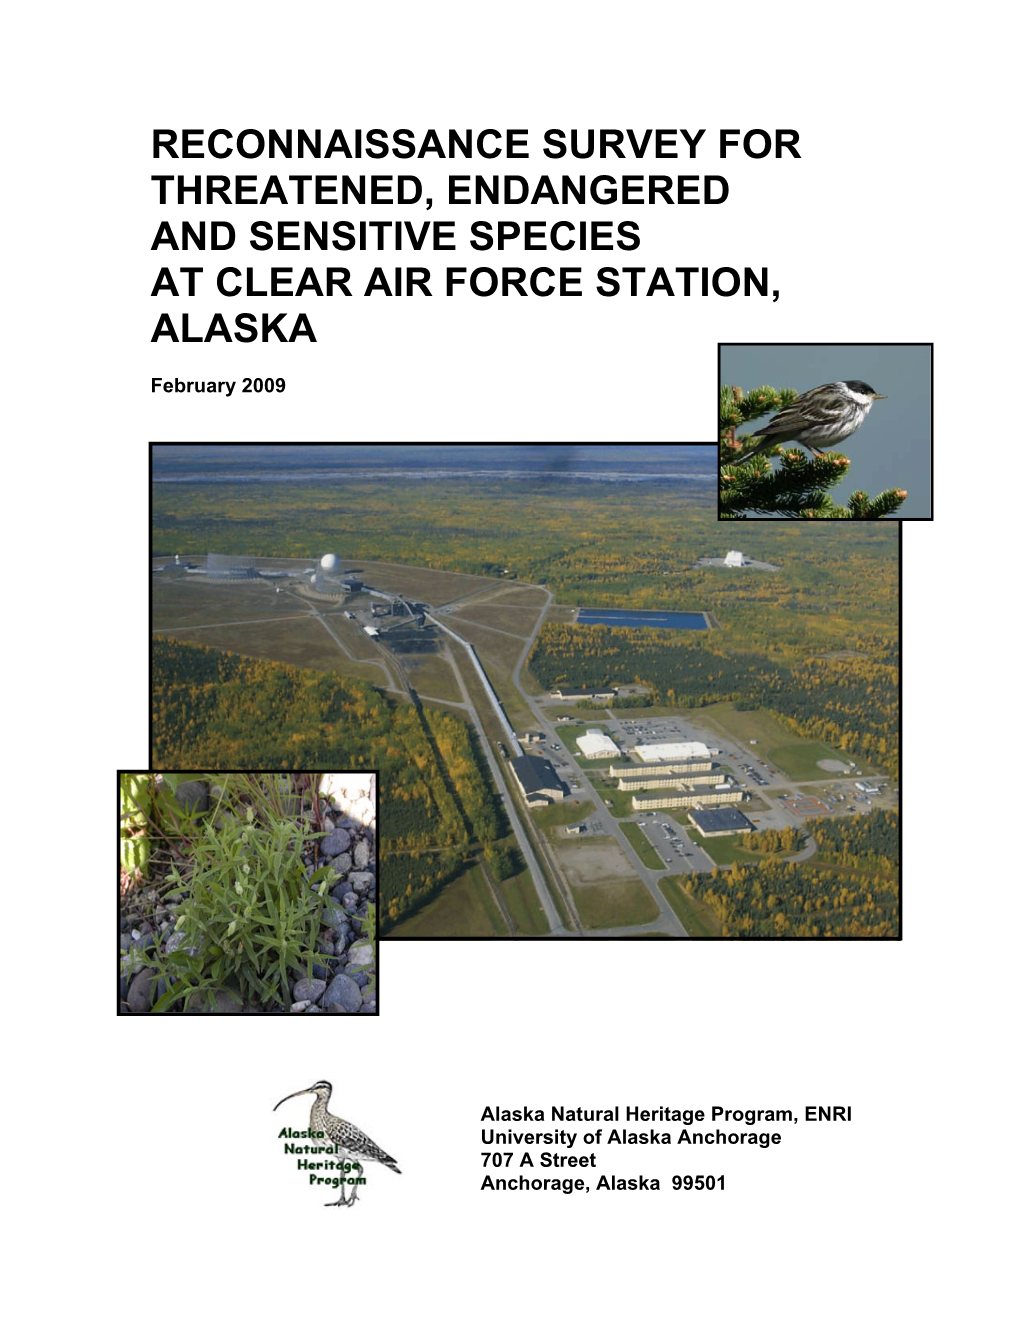 Reconnaissance Survey for Threatened, Endangered and Sensitive Species at Clear Air Force Station, Alaska